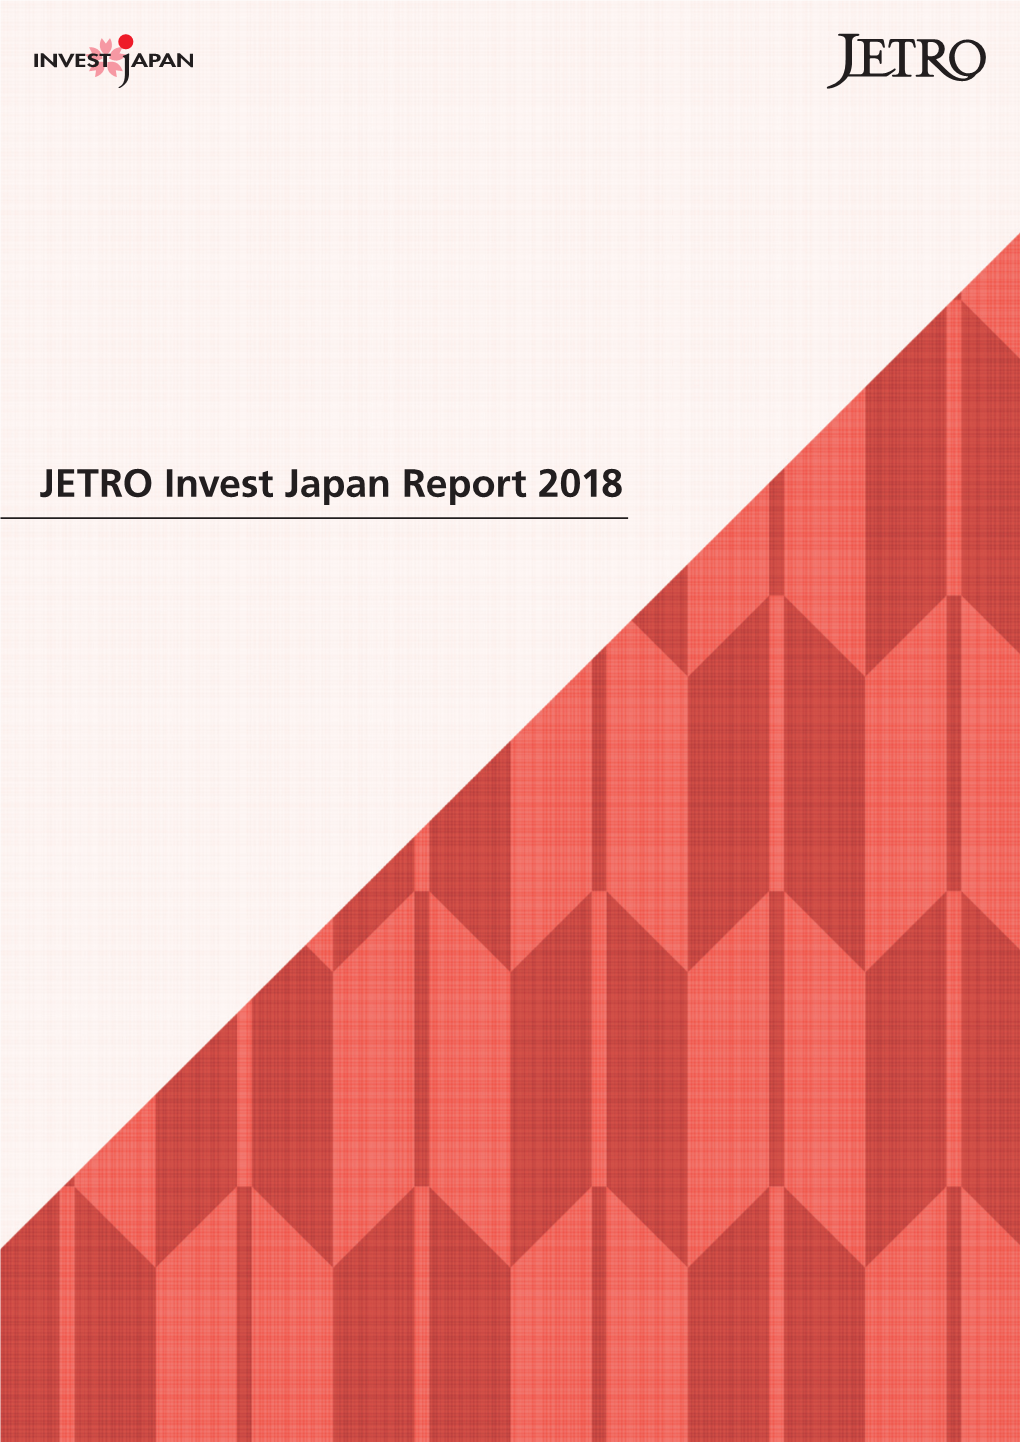 JETRO Invest Japan Report 2018 Message from the Chairman